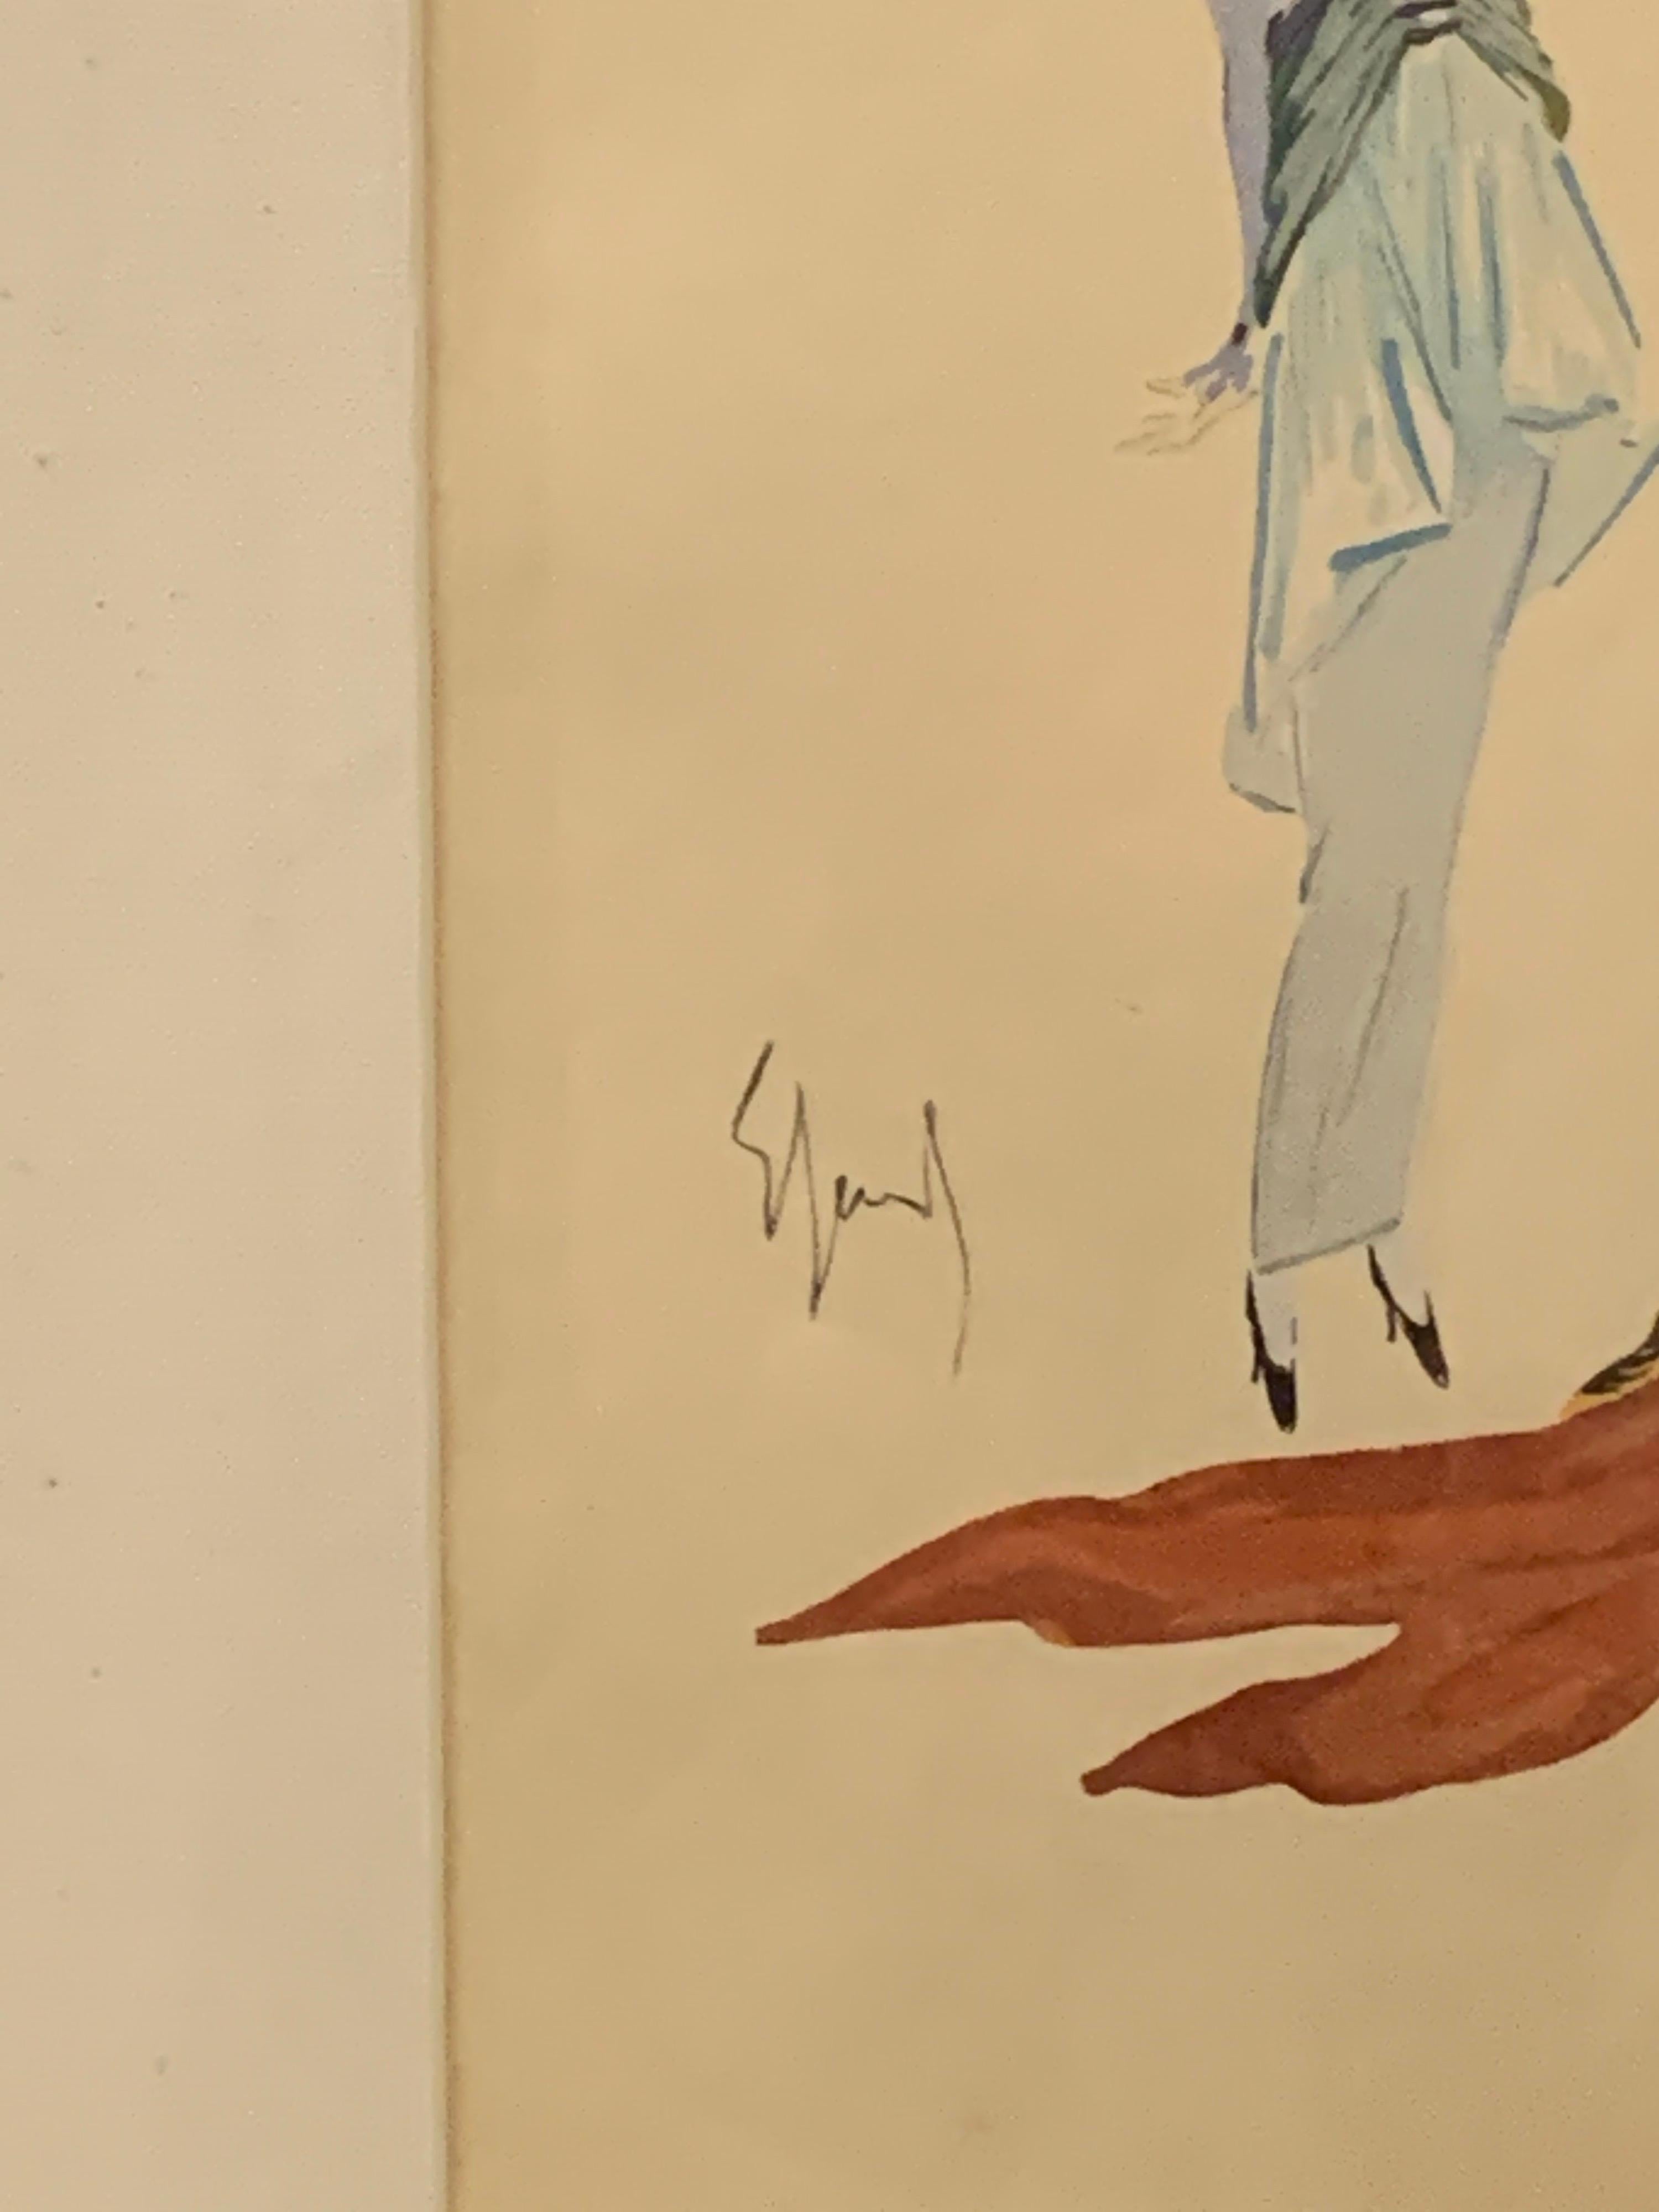 Absolutely in the artistic style of Christian Bérard, this fashion drawing and painted watercolor on paper of two models. This piece is signed but we cannot make out the signature of the artist who made these amazingly vibrant pieces of fashion art.